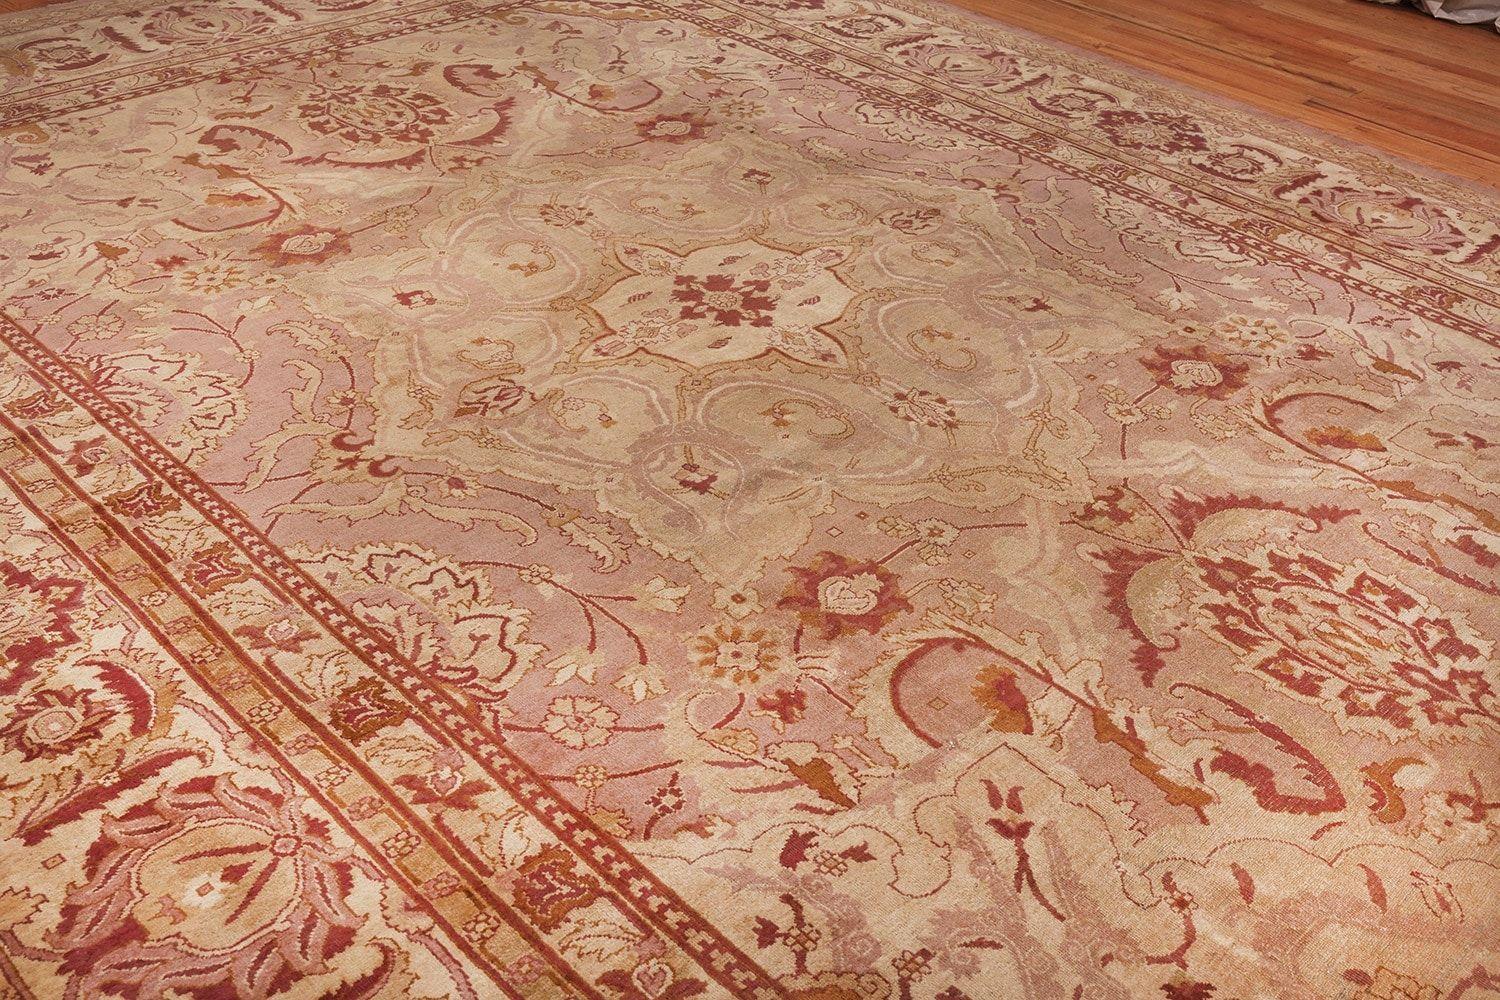 Beautiful and extremely decorative large size and soft mauve color antique Indian agar carpet, country of origin / rug type: antique Indian rugs, circa date: late 19th century. Size: 11 ft 10 in x 15 ft 8 in (3.61 m x 4.78 m)

Subtle mauve colors